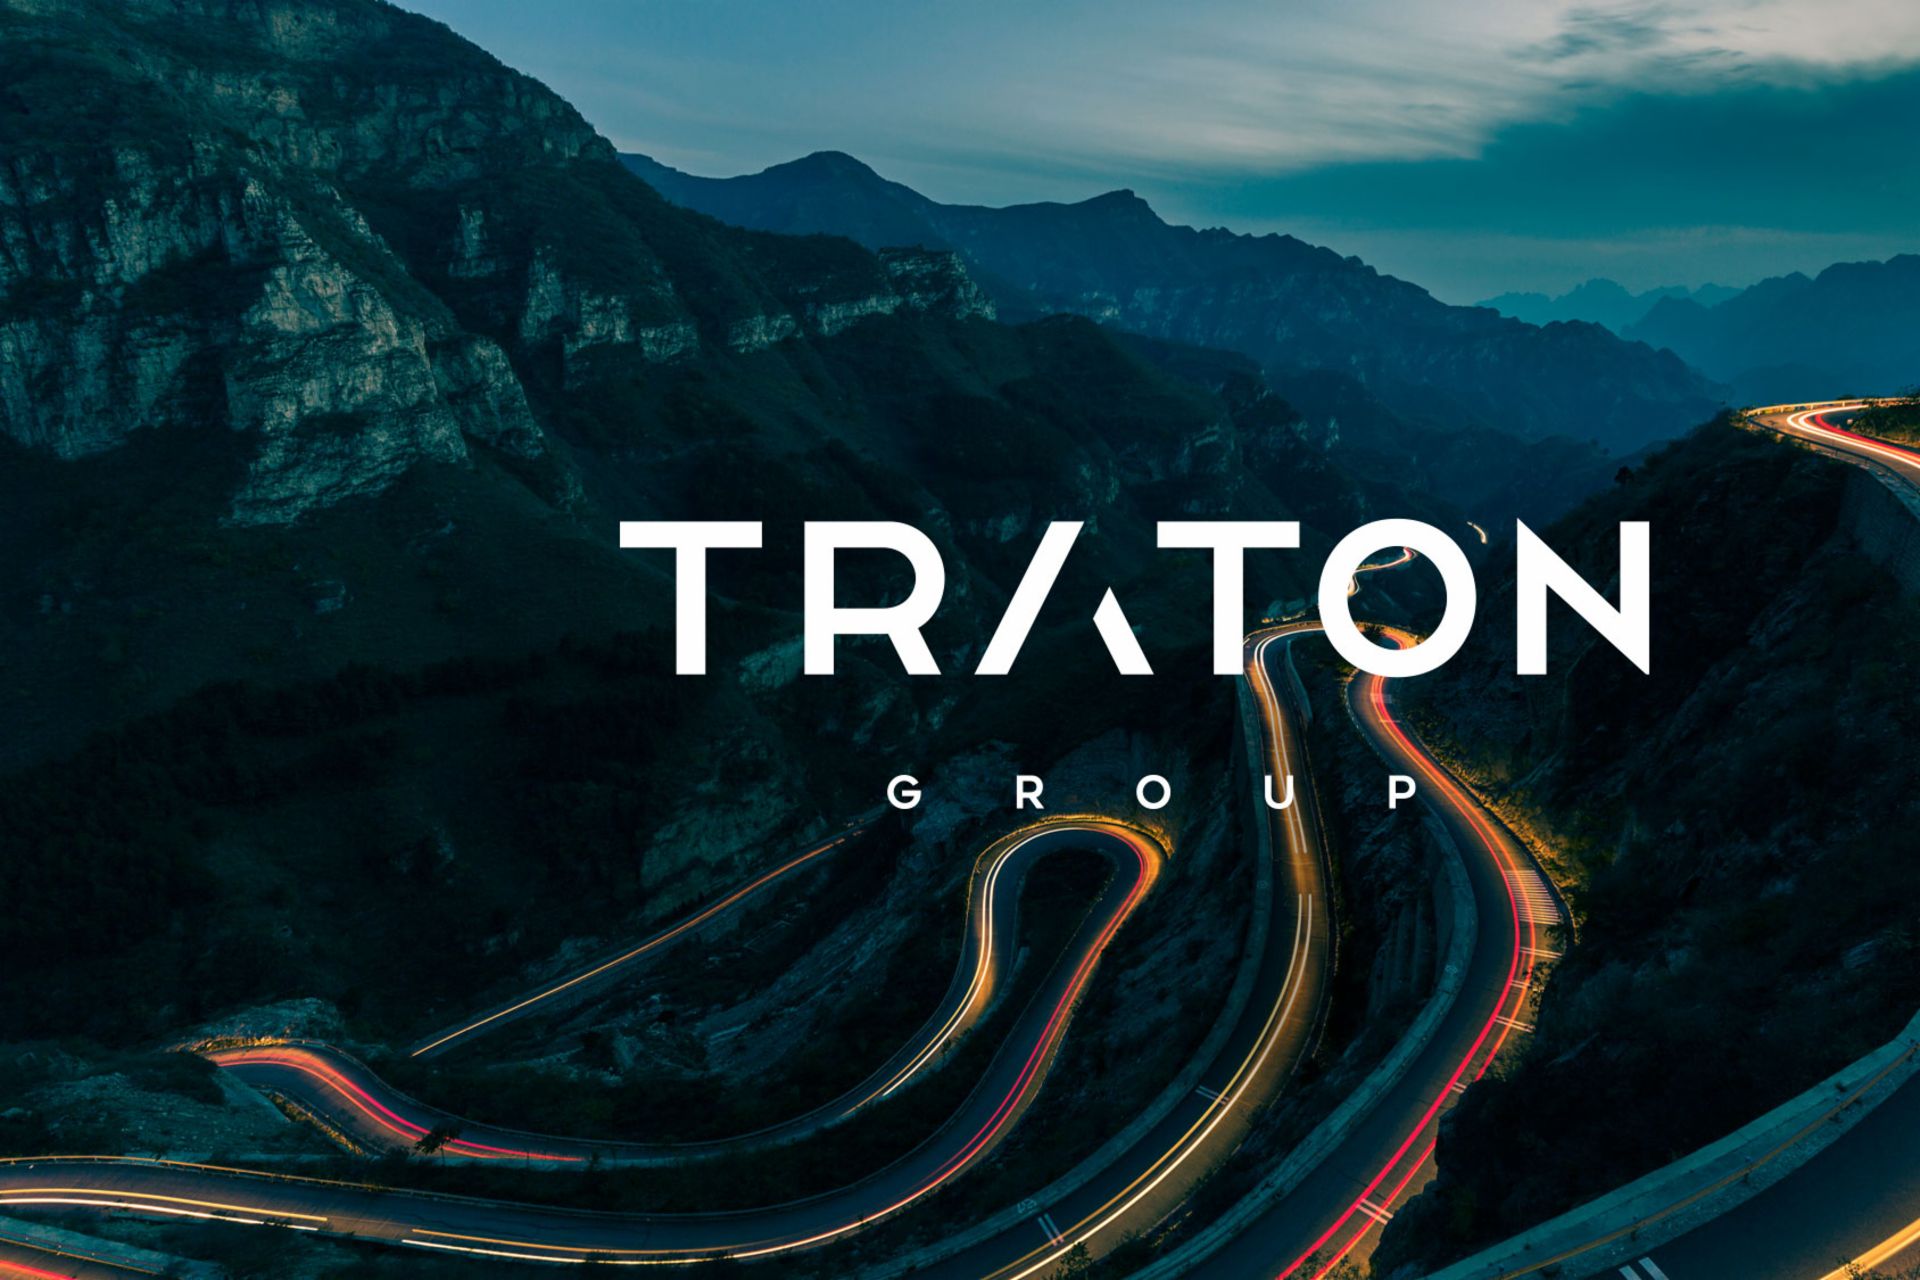 TRATON Logo with background picture
                 